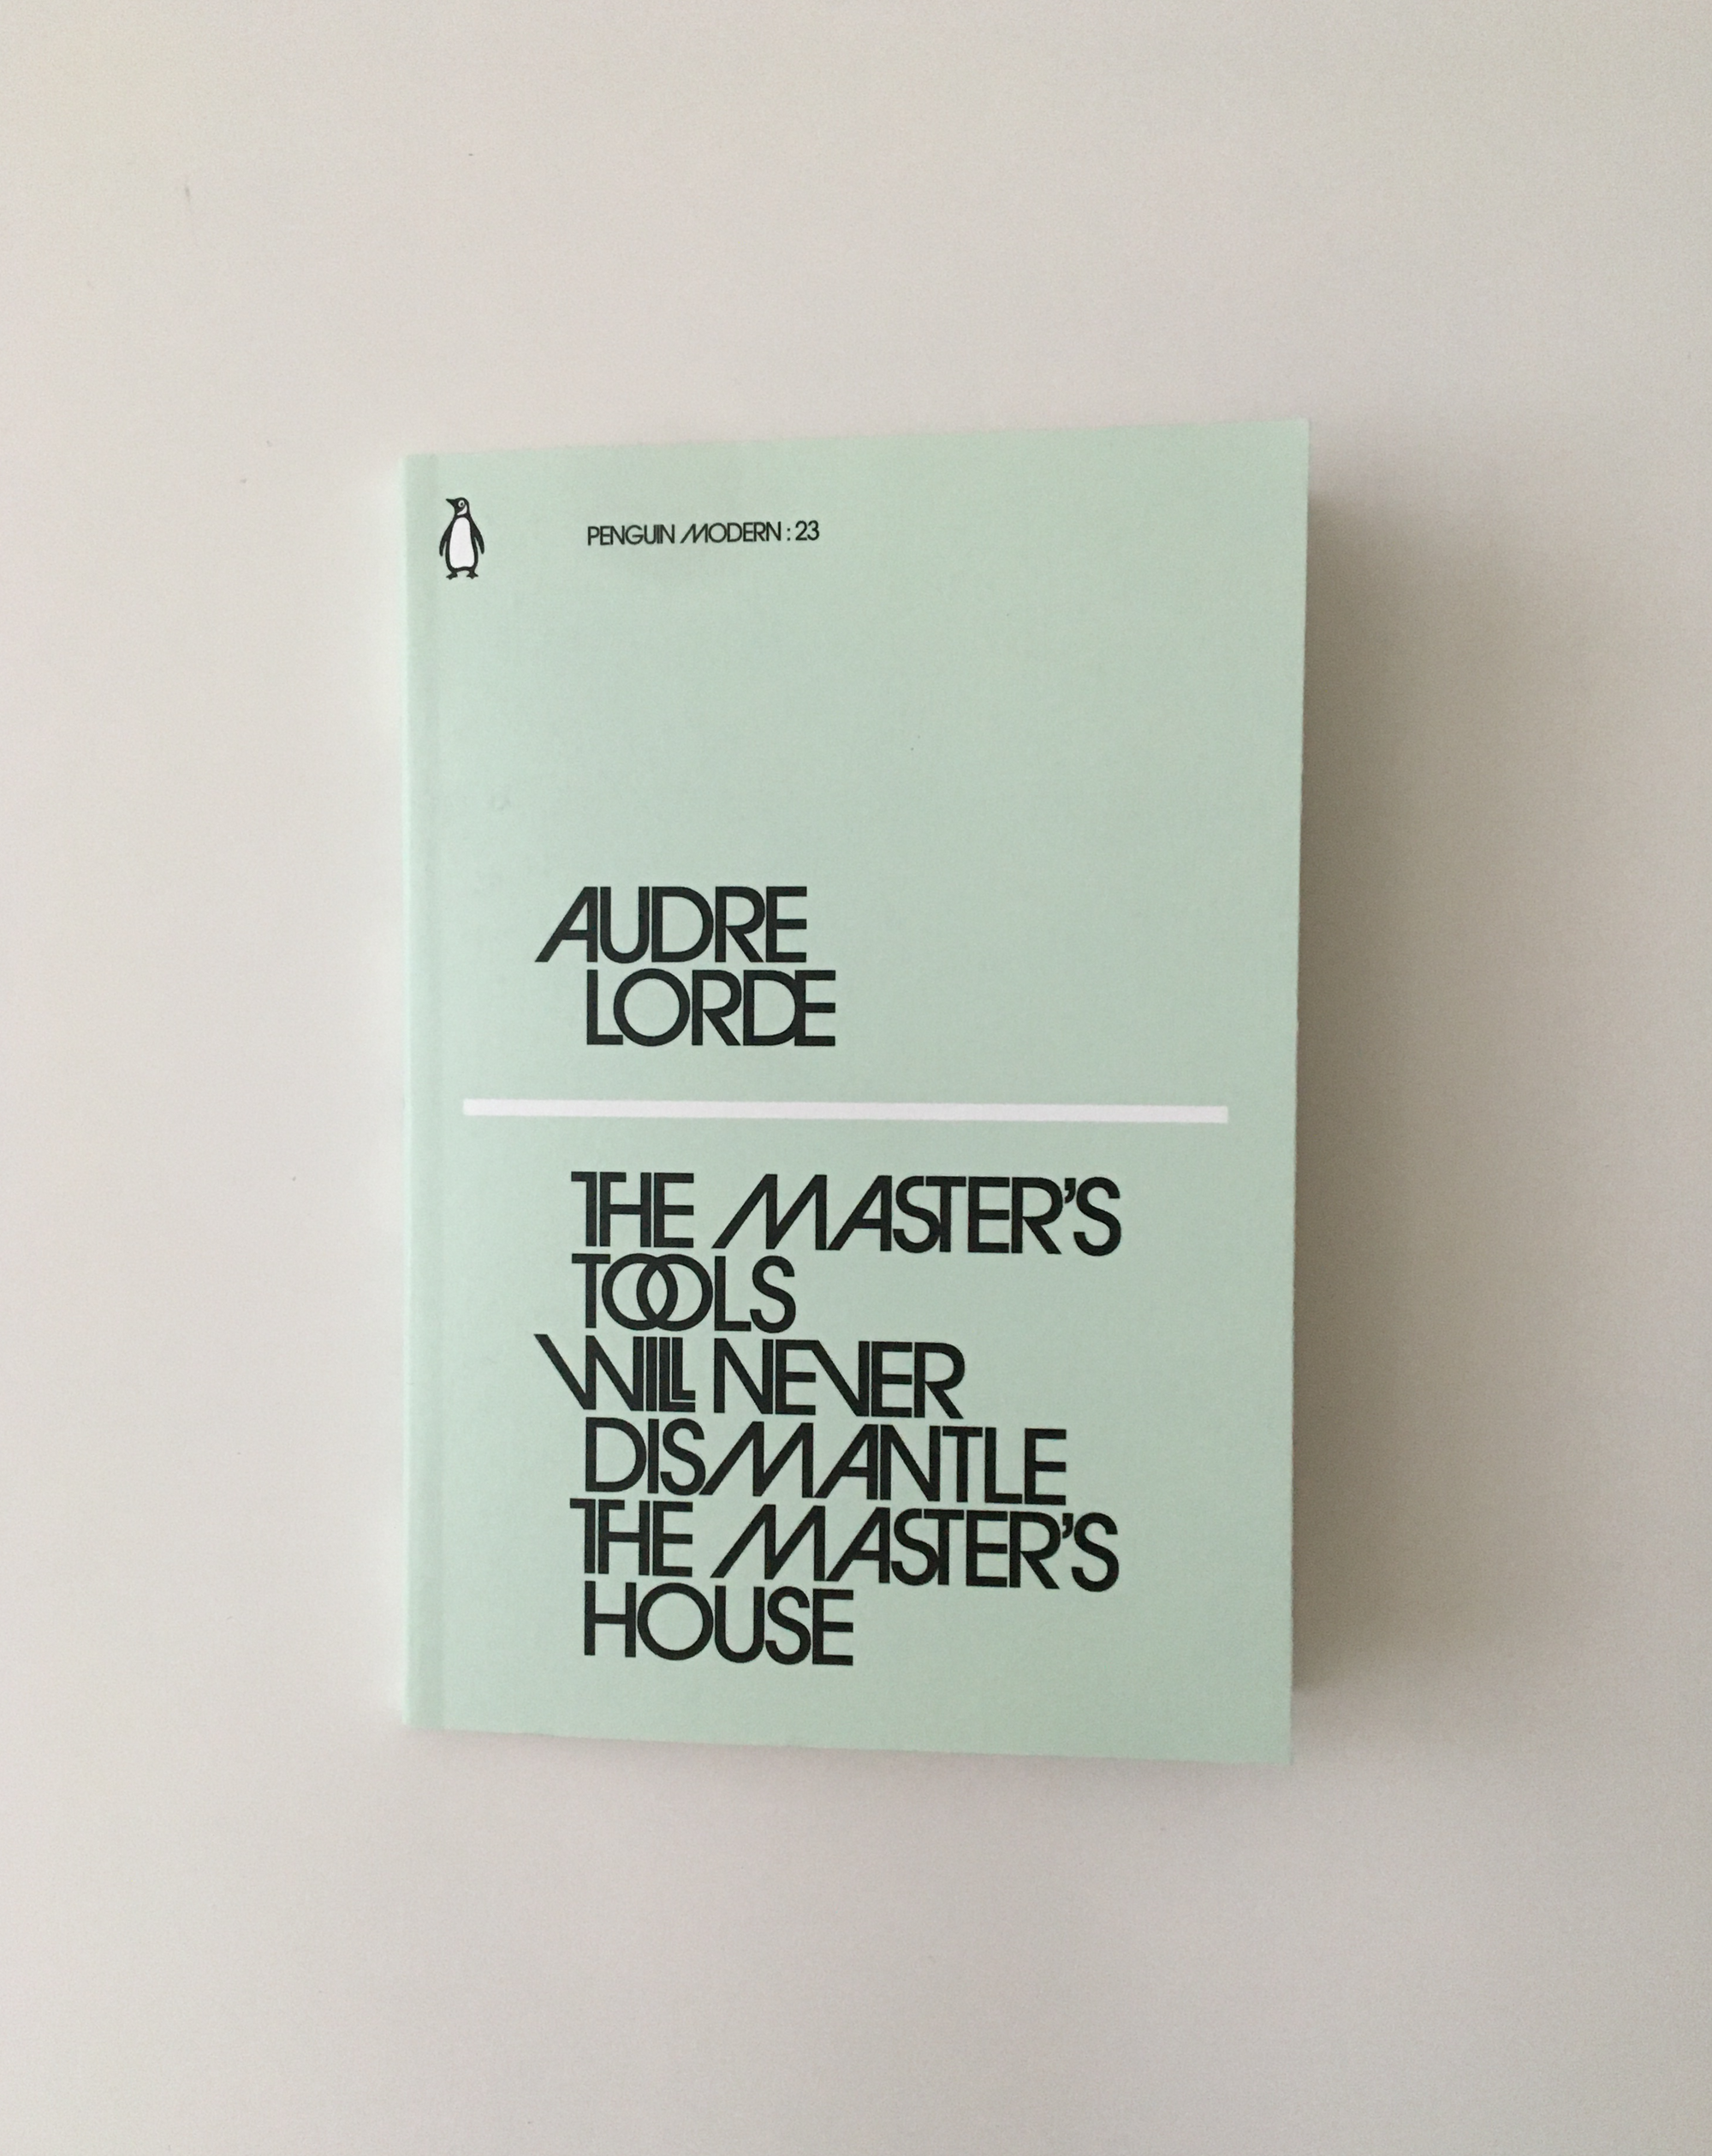 The Master's Tools Will Never Dismantle the Master's House by Audre Lorde, book, Ten Dollar Books, Ten Dollar Books